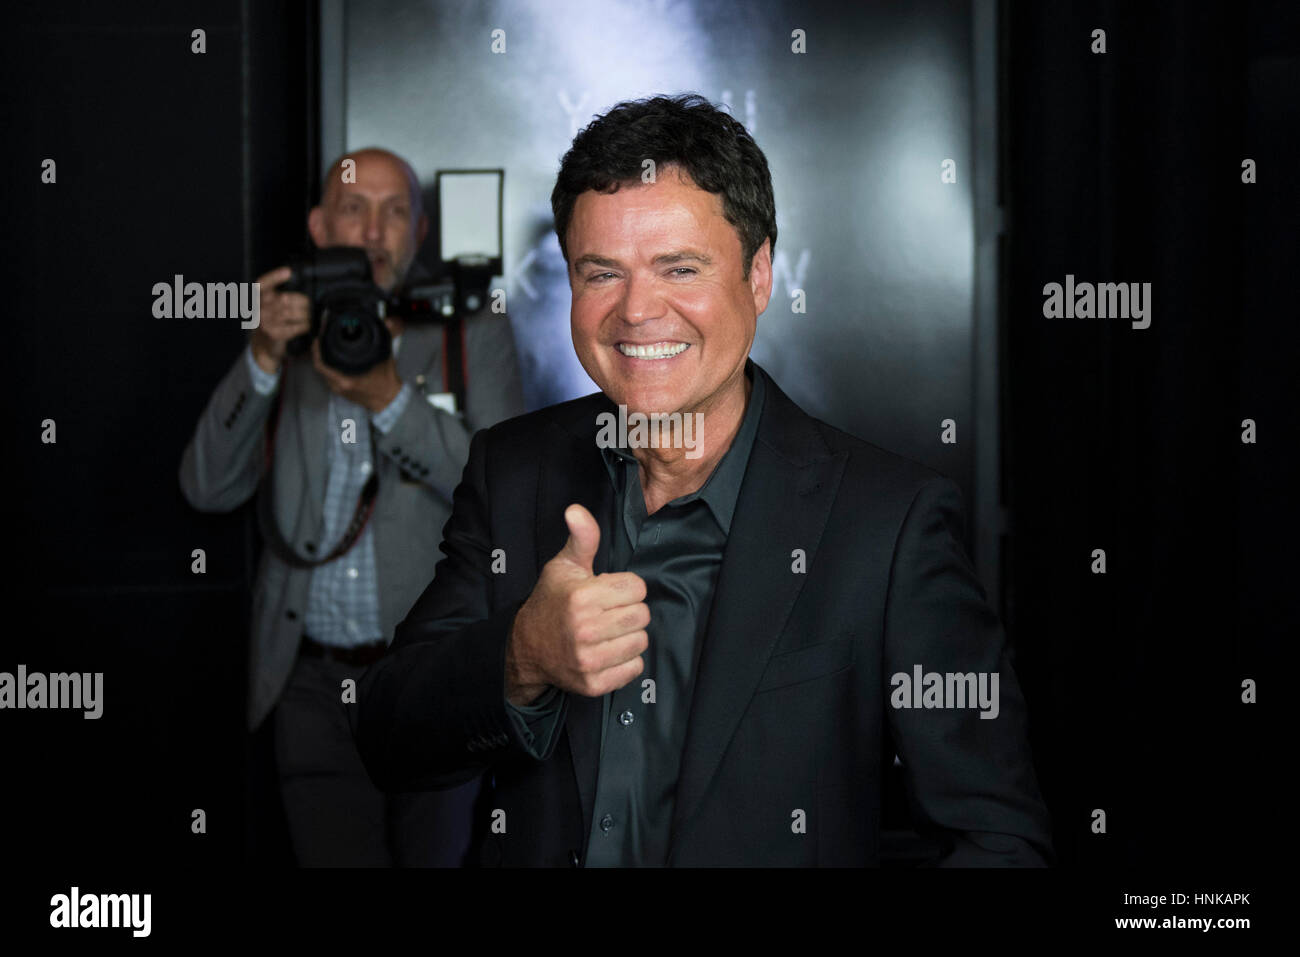 Donny Osmond poses on the red carpet ahead of the Las Vegas premiere for the film Jason Bourne at Caesars Palace hotel-casino Monday, July 18, 2016. Stock Photo